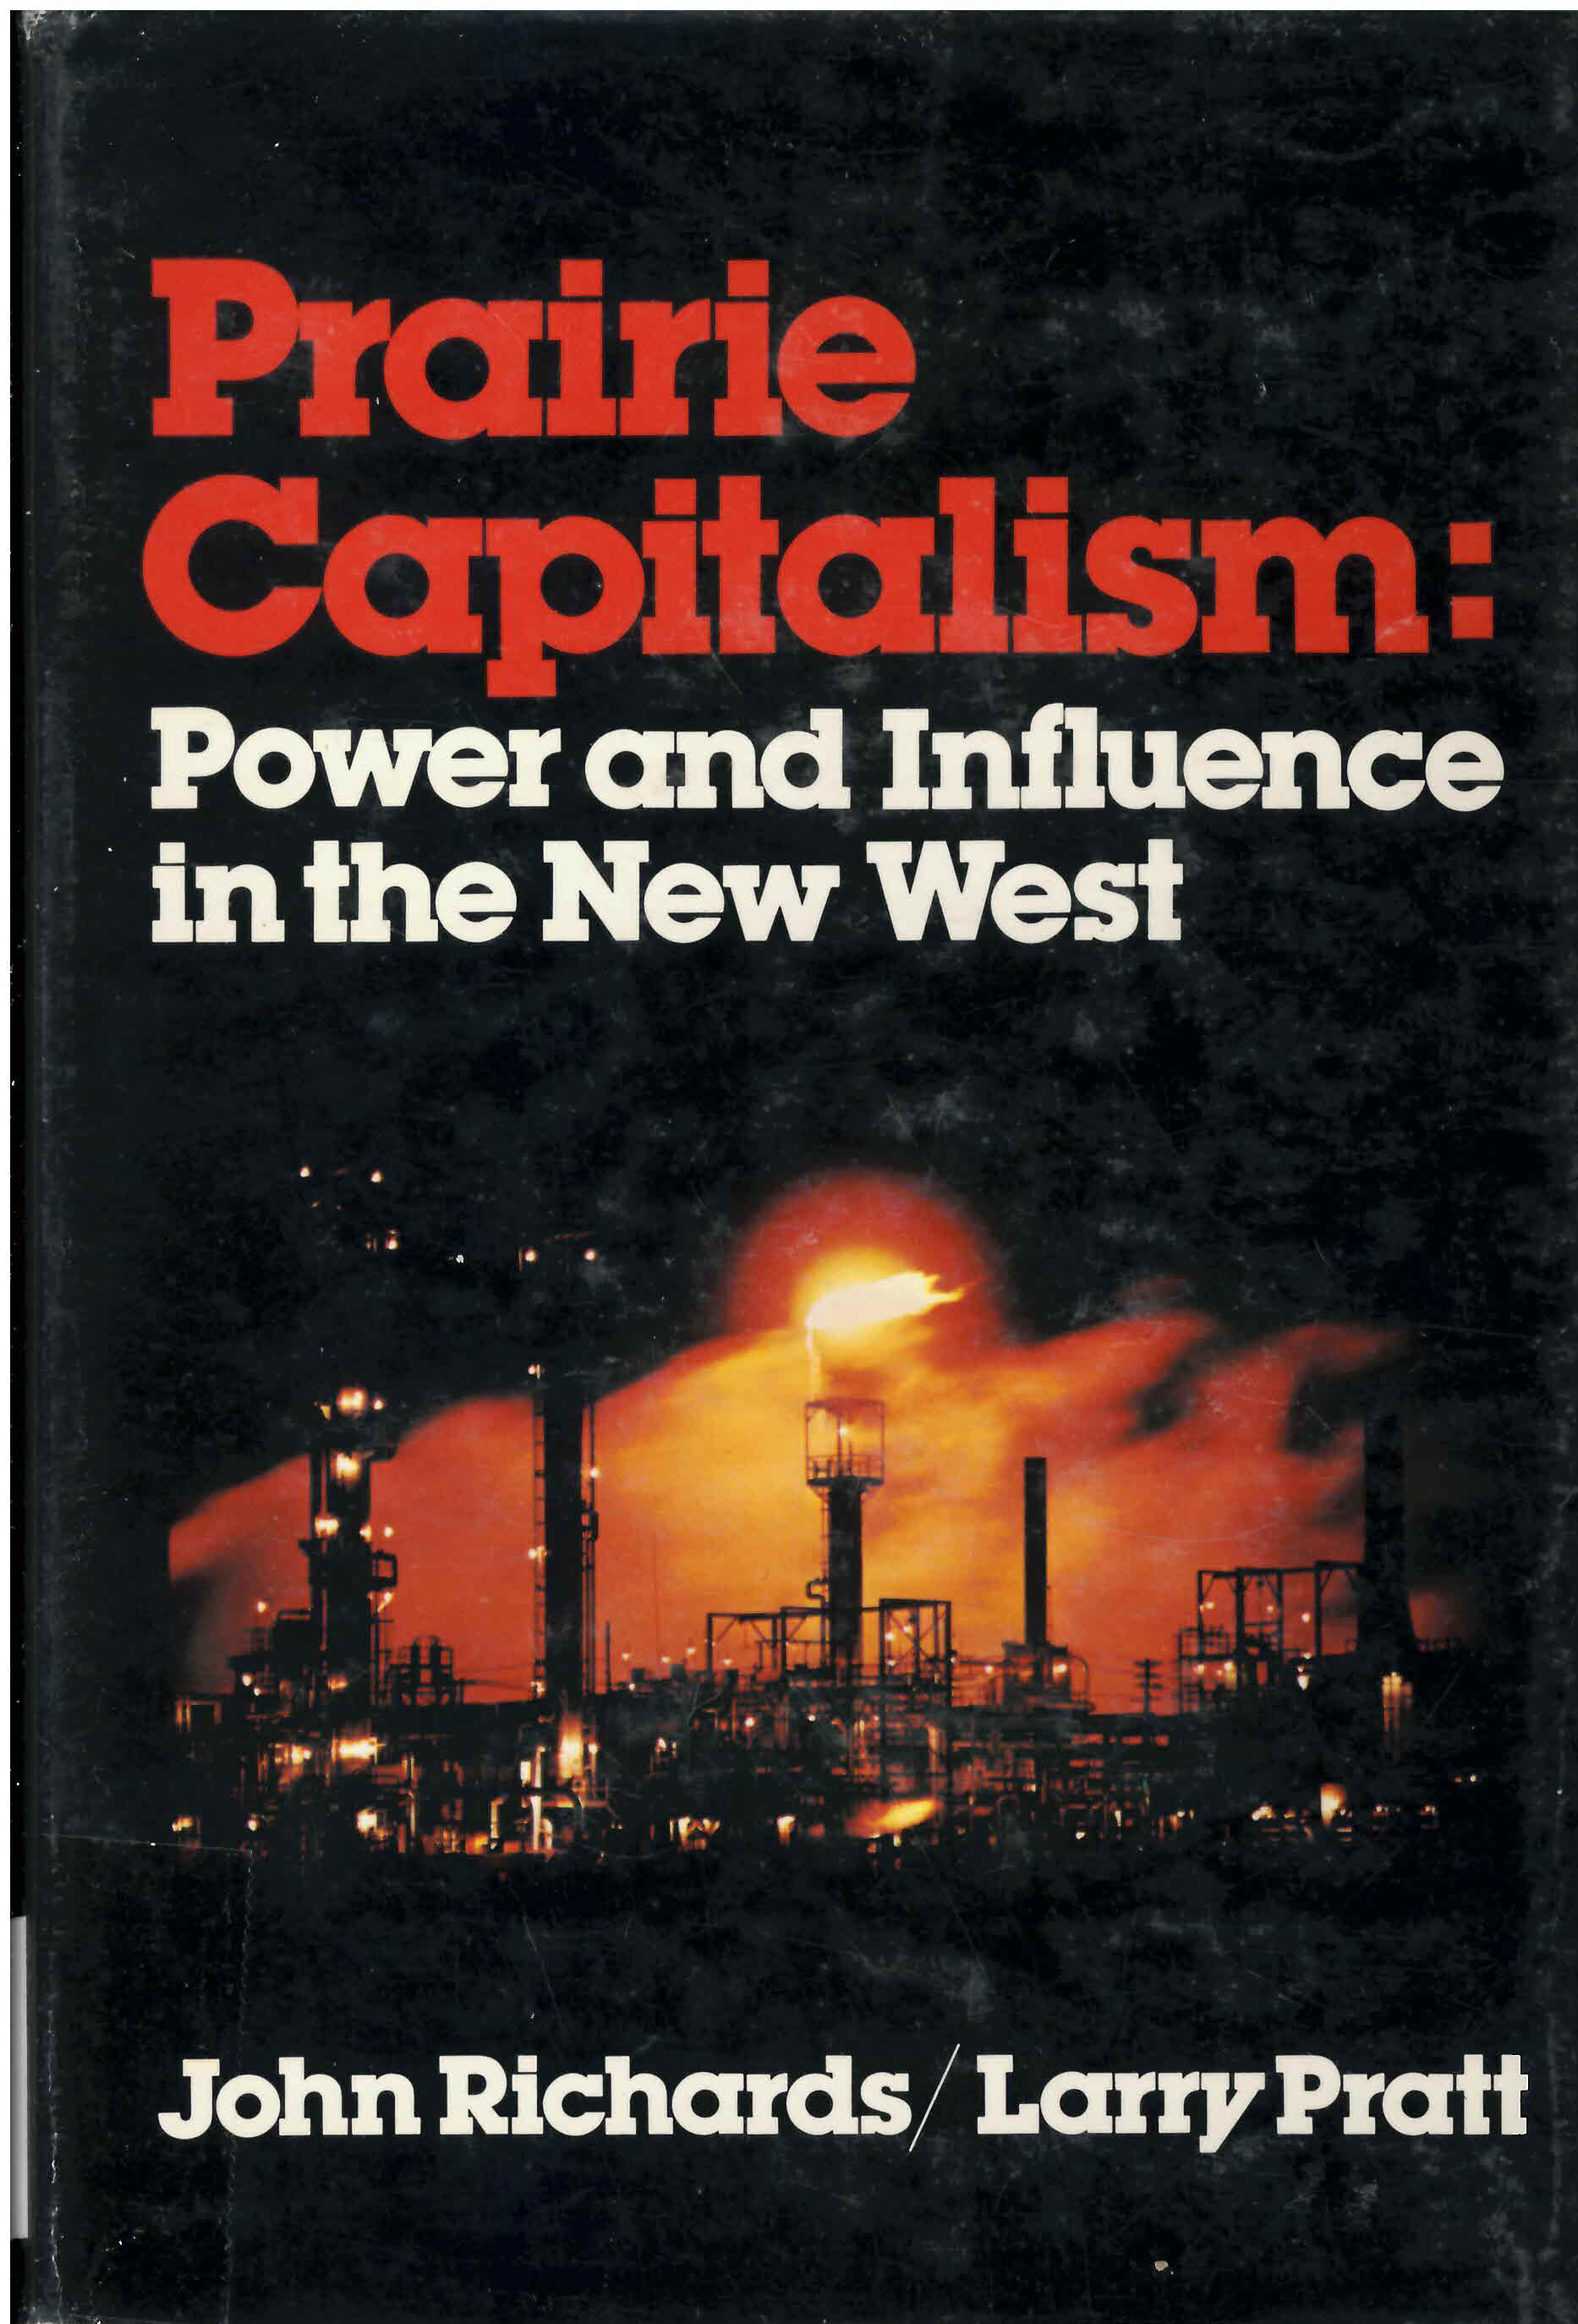 Prairie capitalism : power and influence in the new west